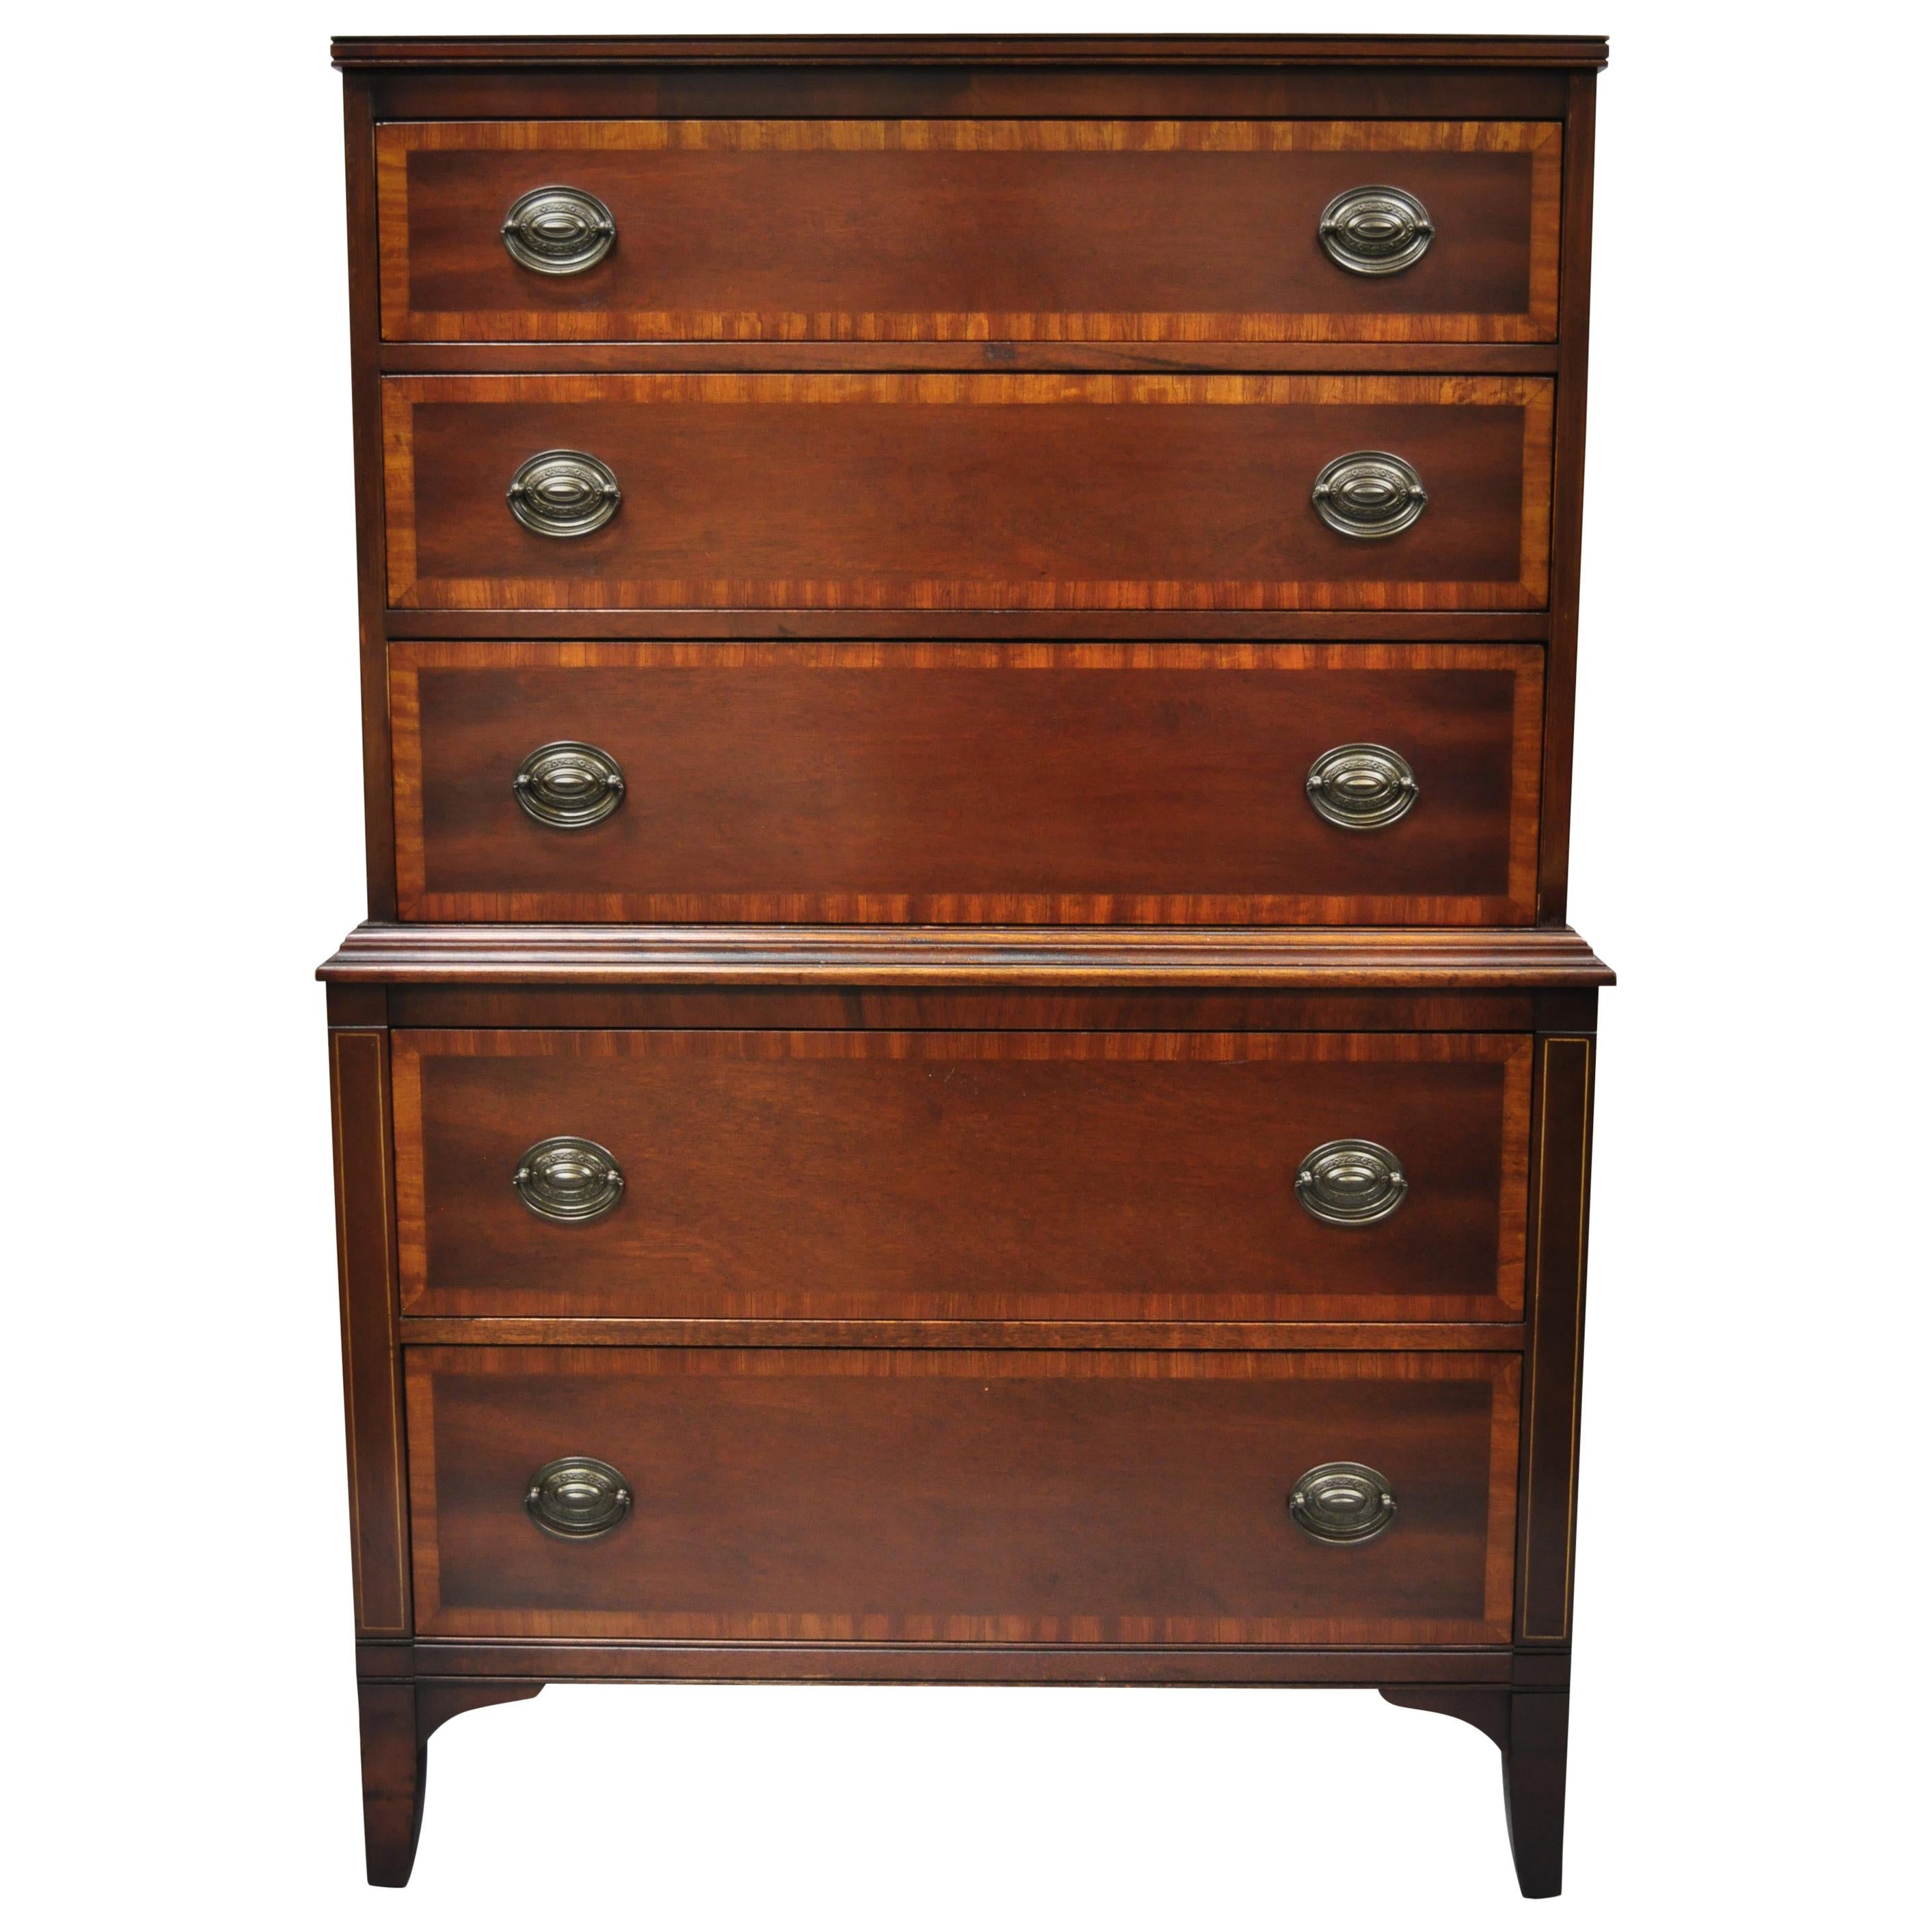 Vintage Mahogany 5 Drawer Banded Inlay Tall Chest Dresser Highboy by Stiehl